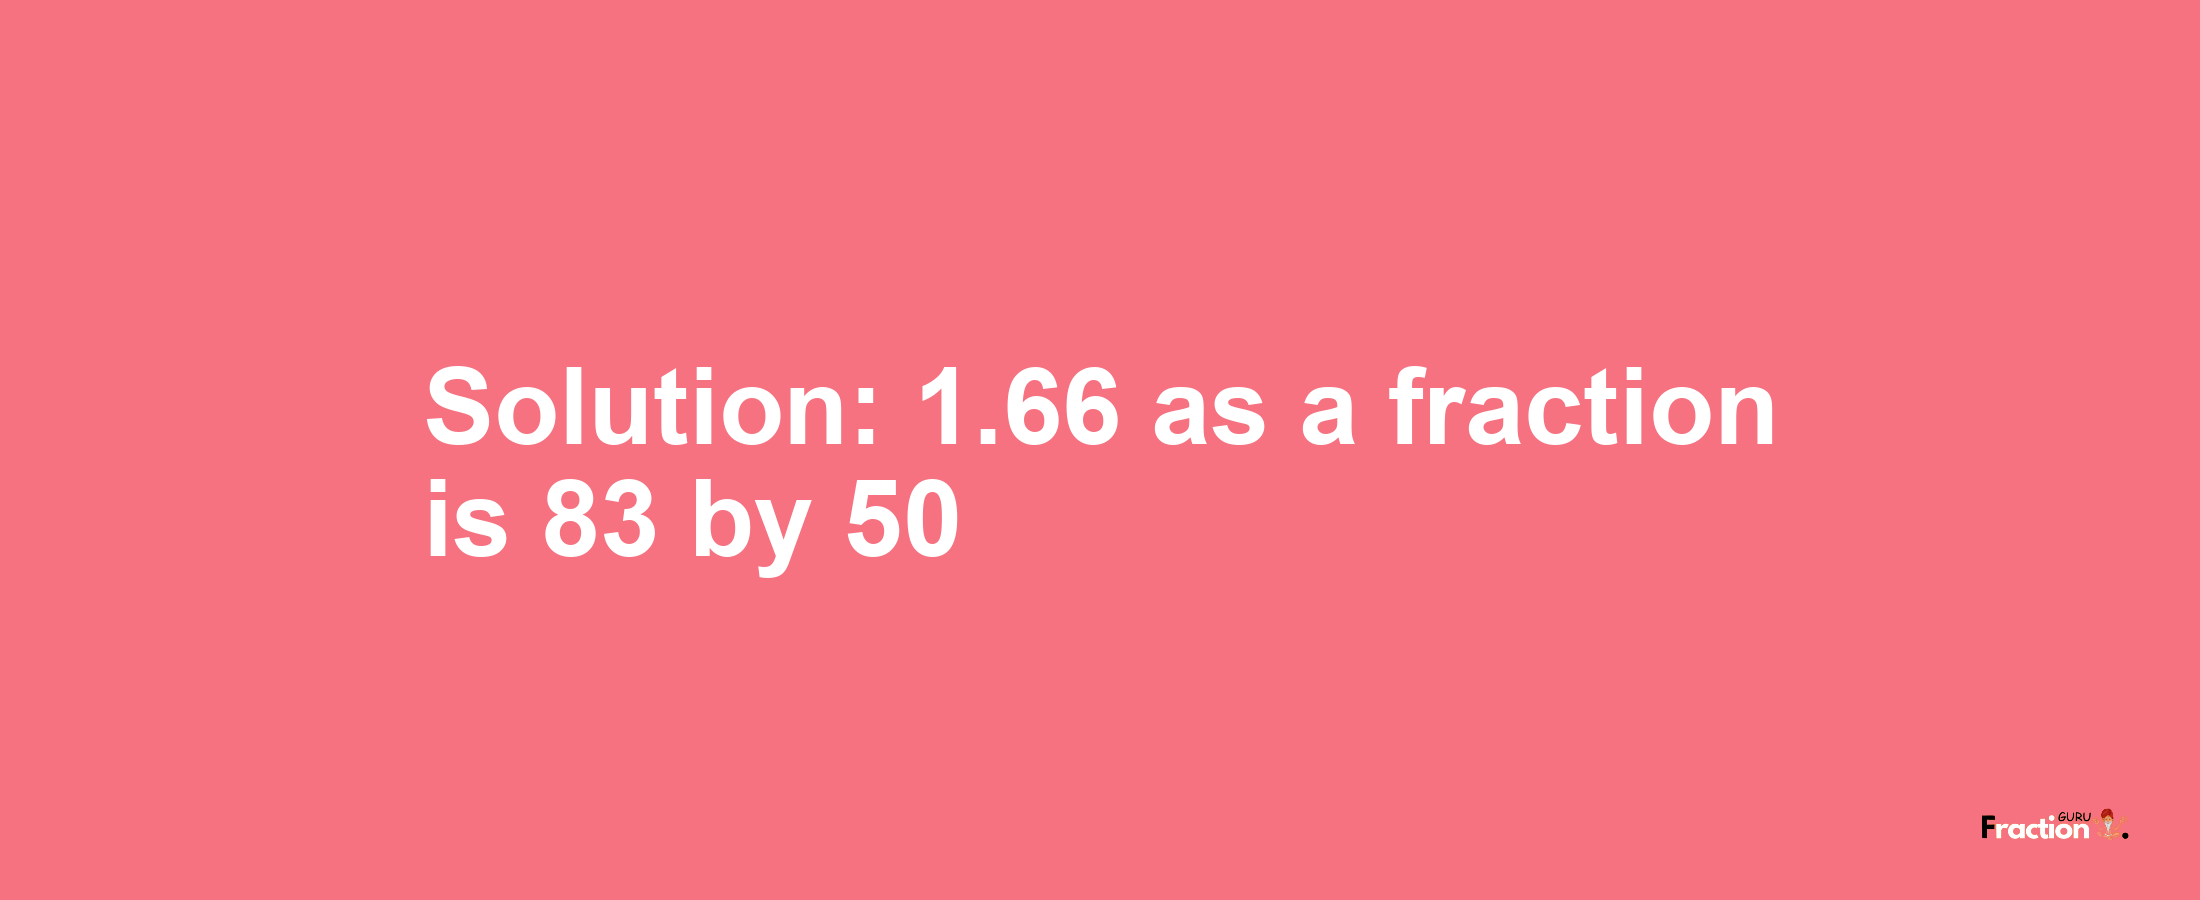 Solution:1.66 as a fraction is 83/50